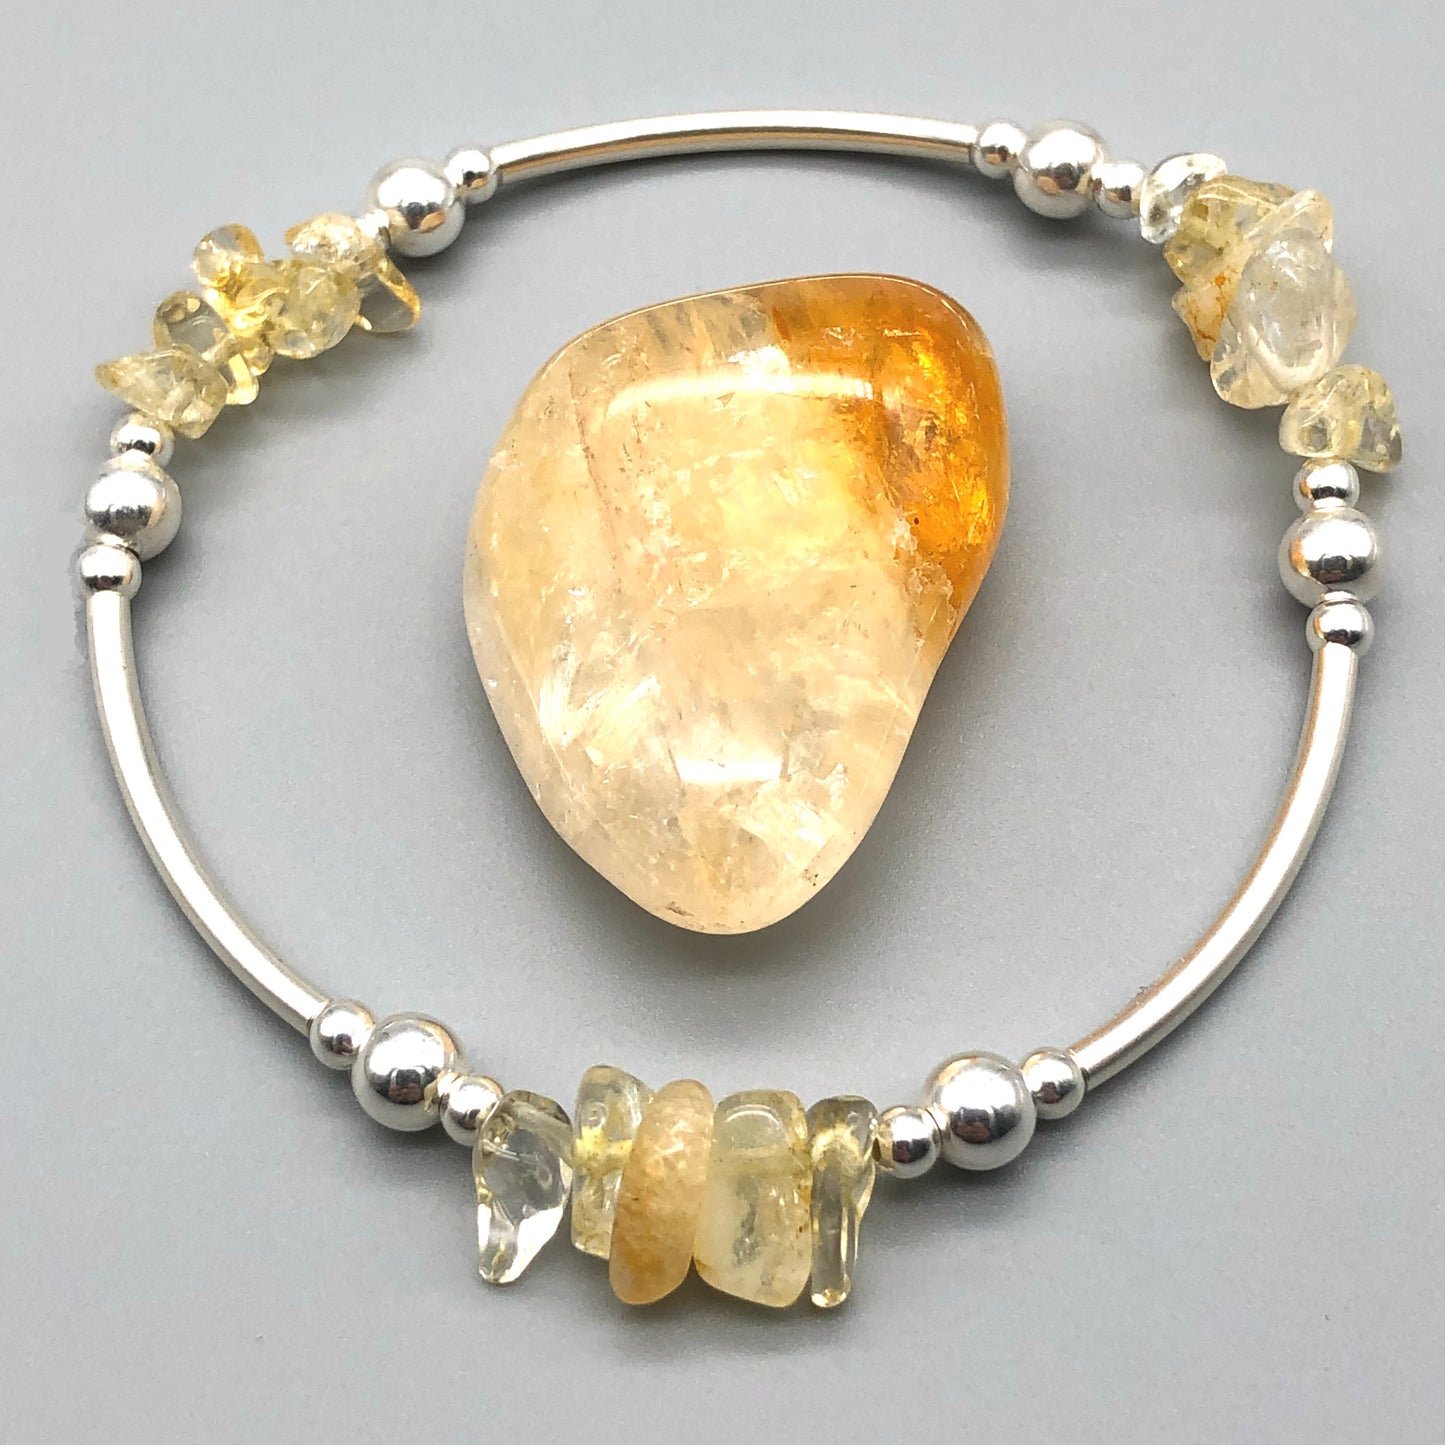 Citrine healing crystal & sterling silver women's stacking bracelet by My Silver Wish